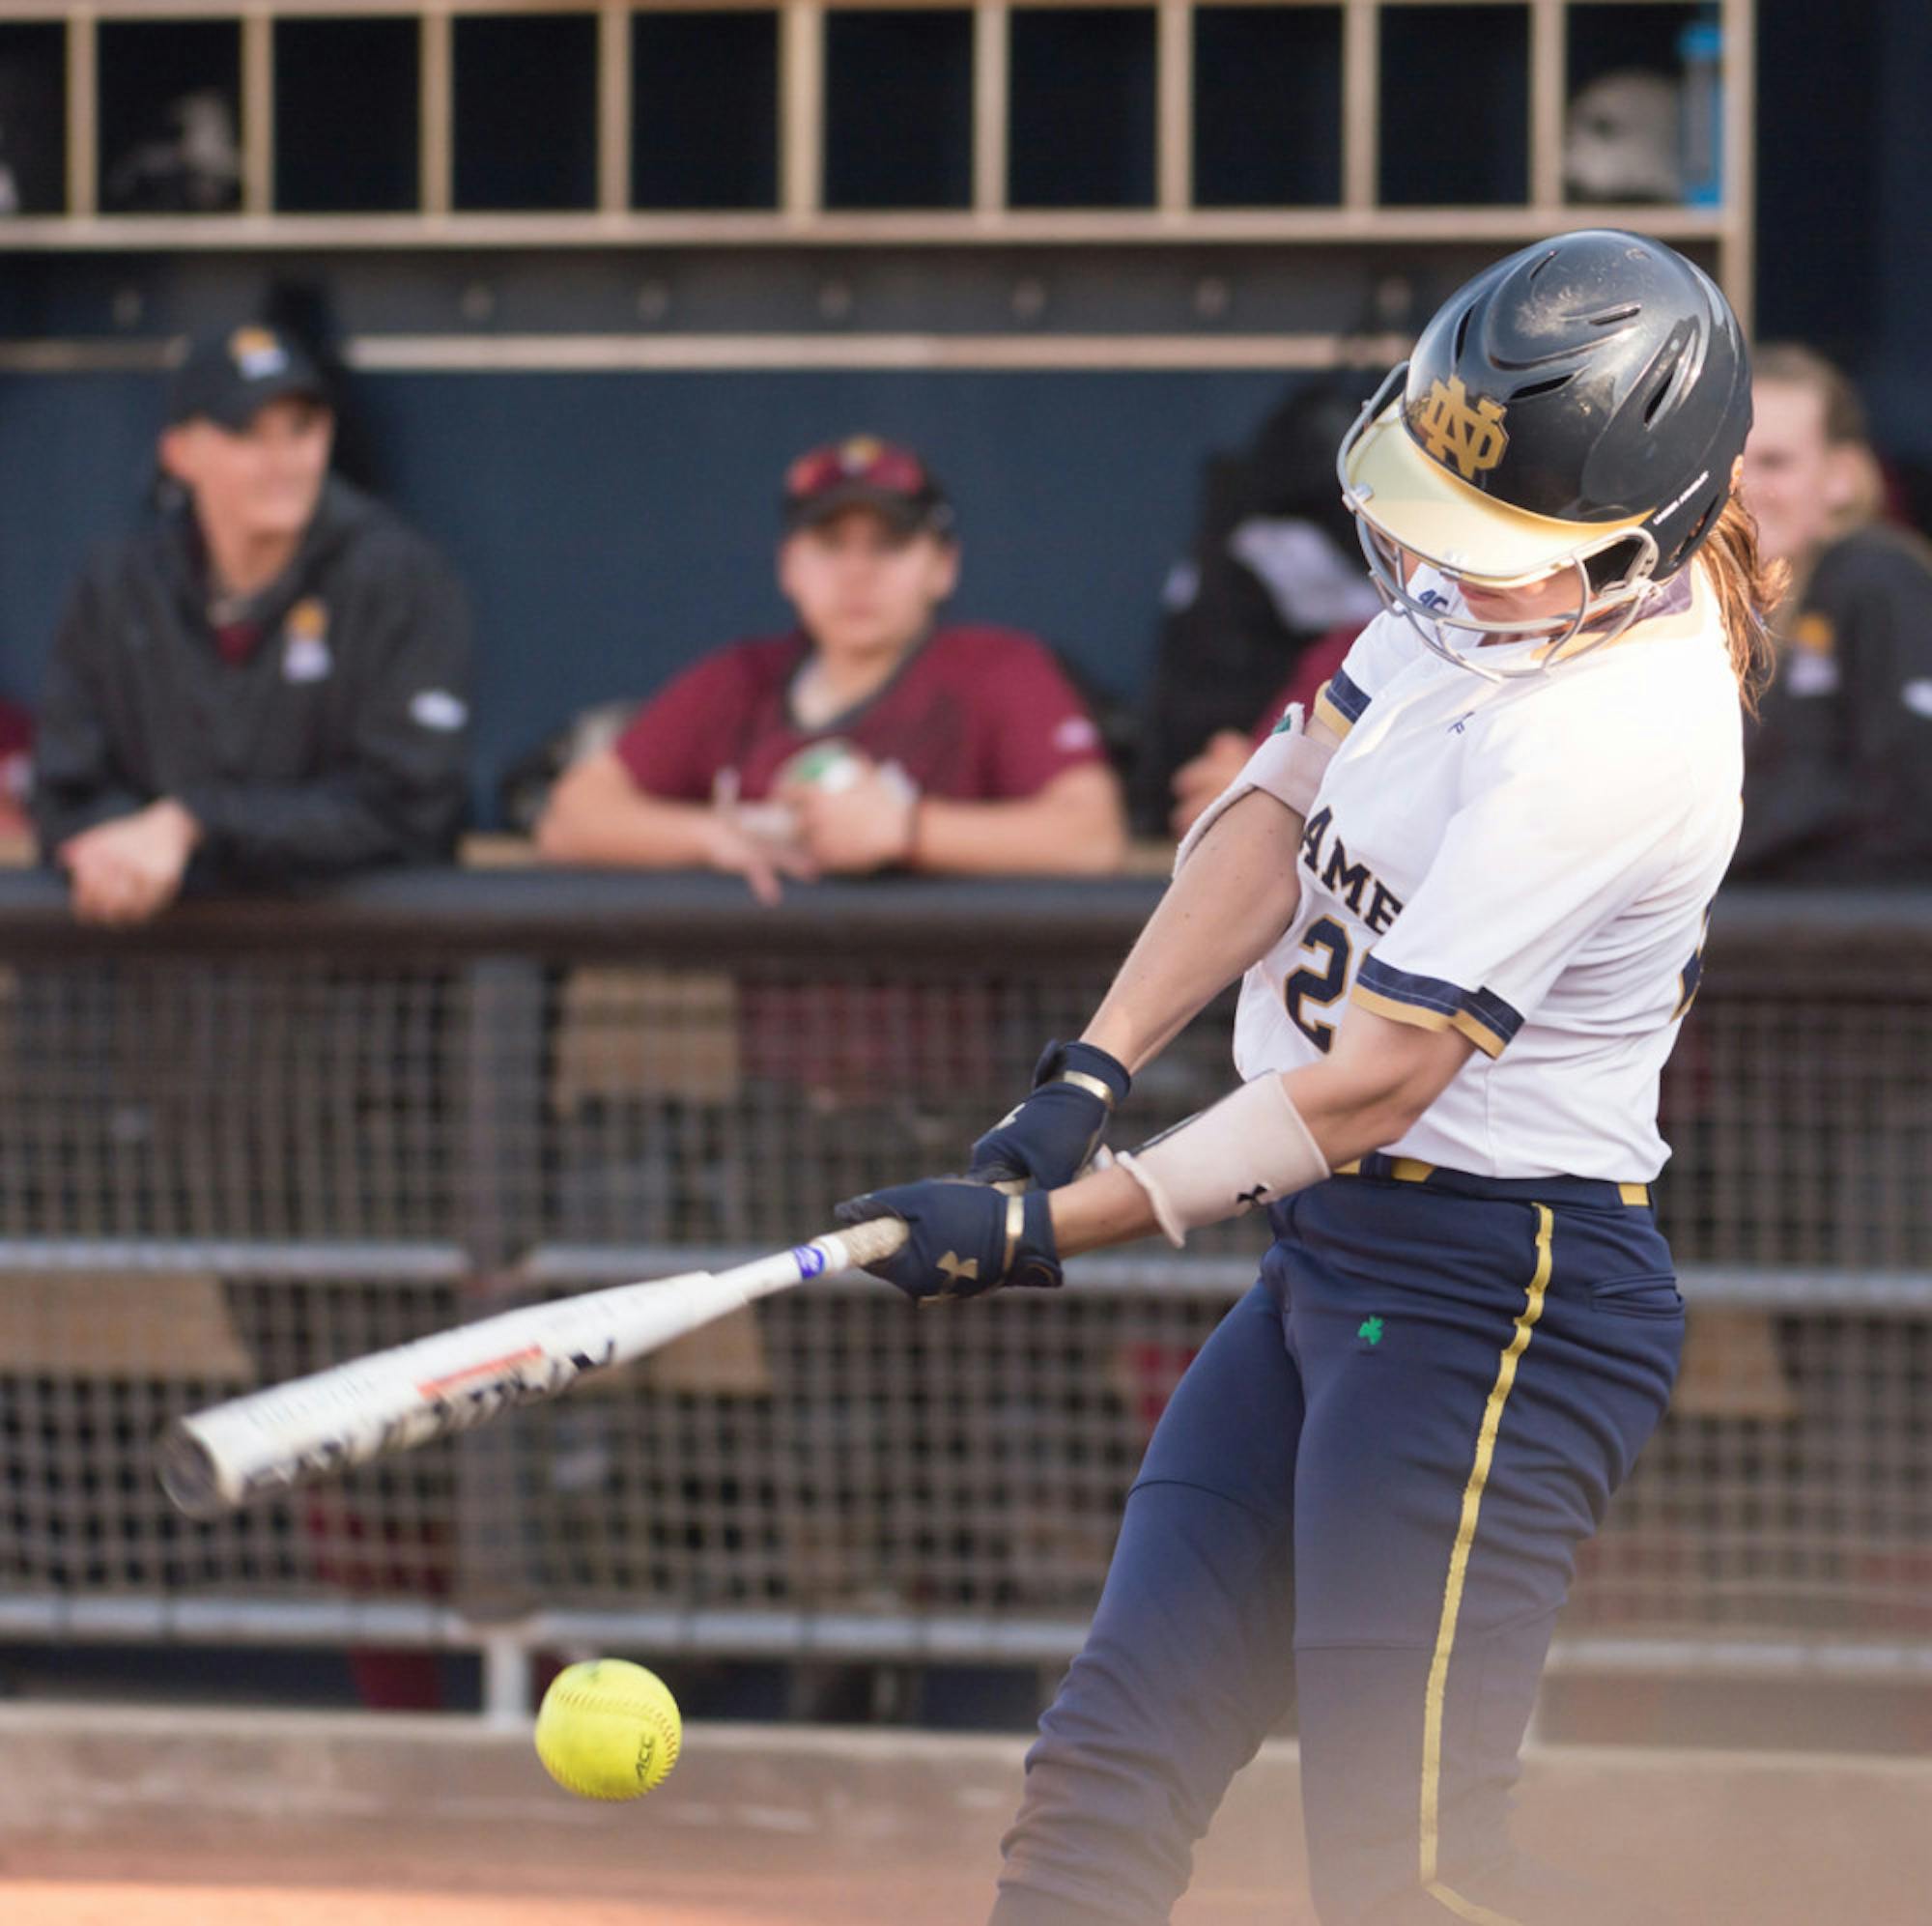 Irish junior Morgan Reed follows through on a swing during Notre Dame’s 13-4 win over IUPUI on Apr. 12 at Melissa Cook Stadium.